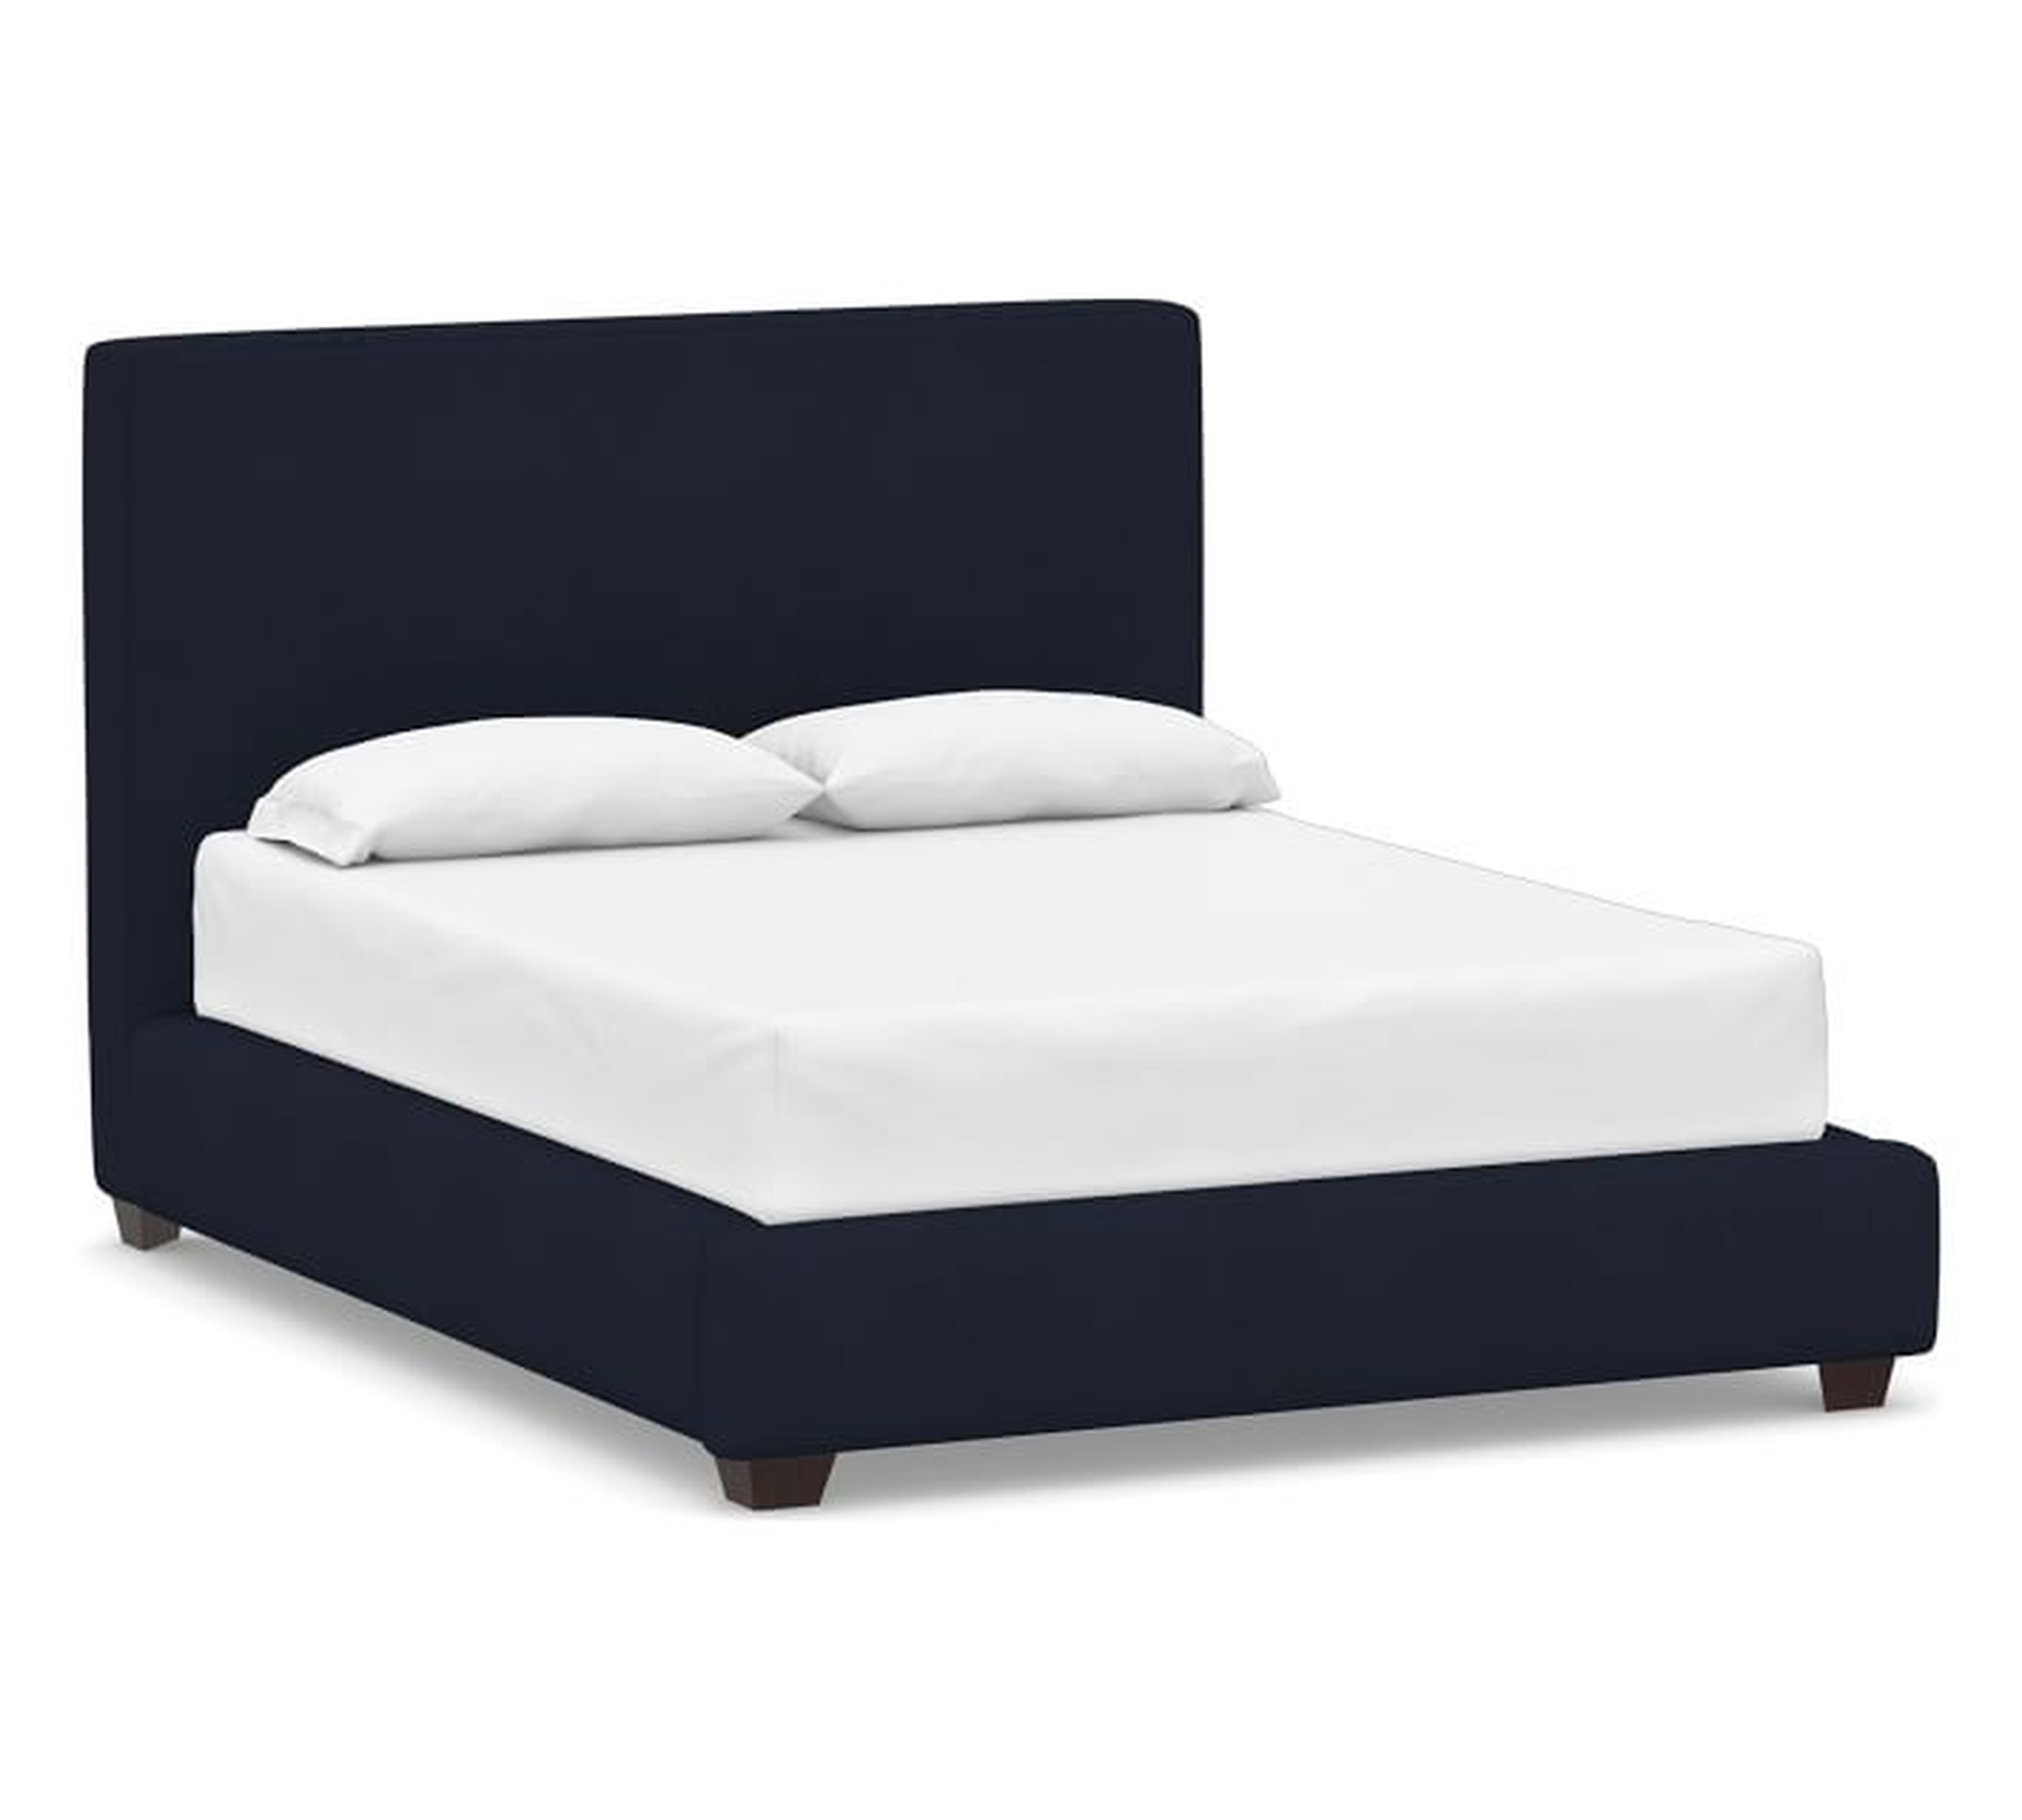 Big Sur Upholstered Bed, Queen, Twill Cadet Navy - Pottery Barn